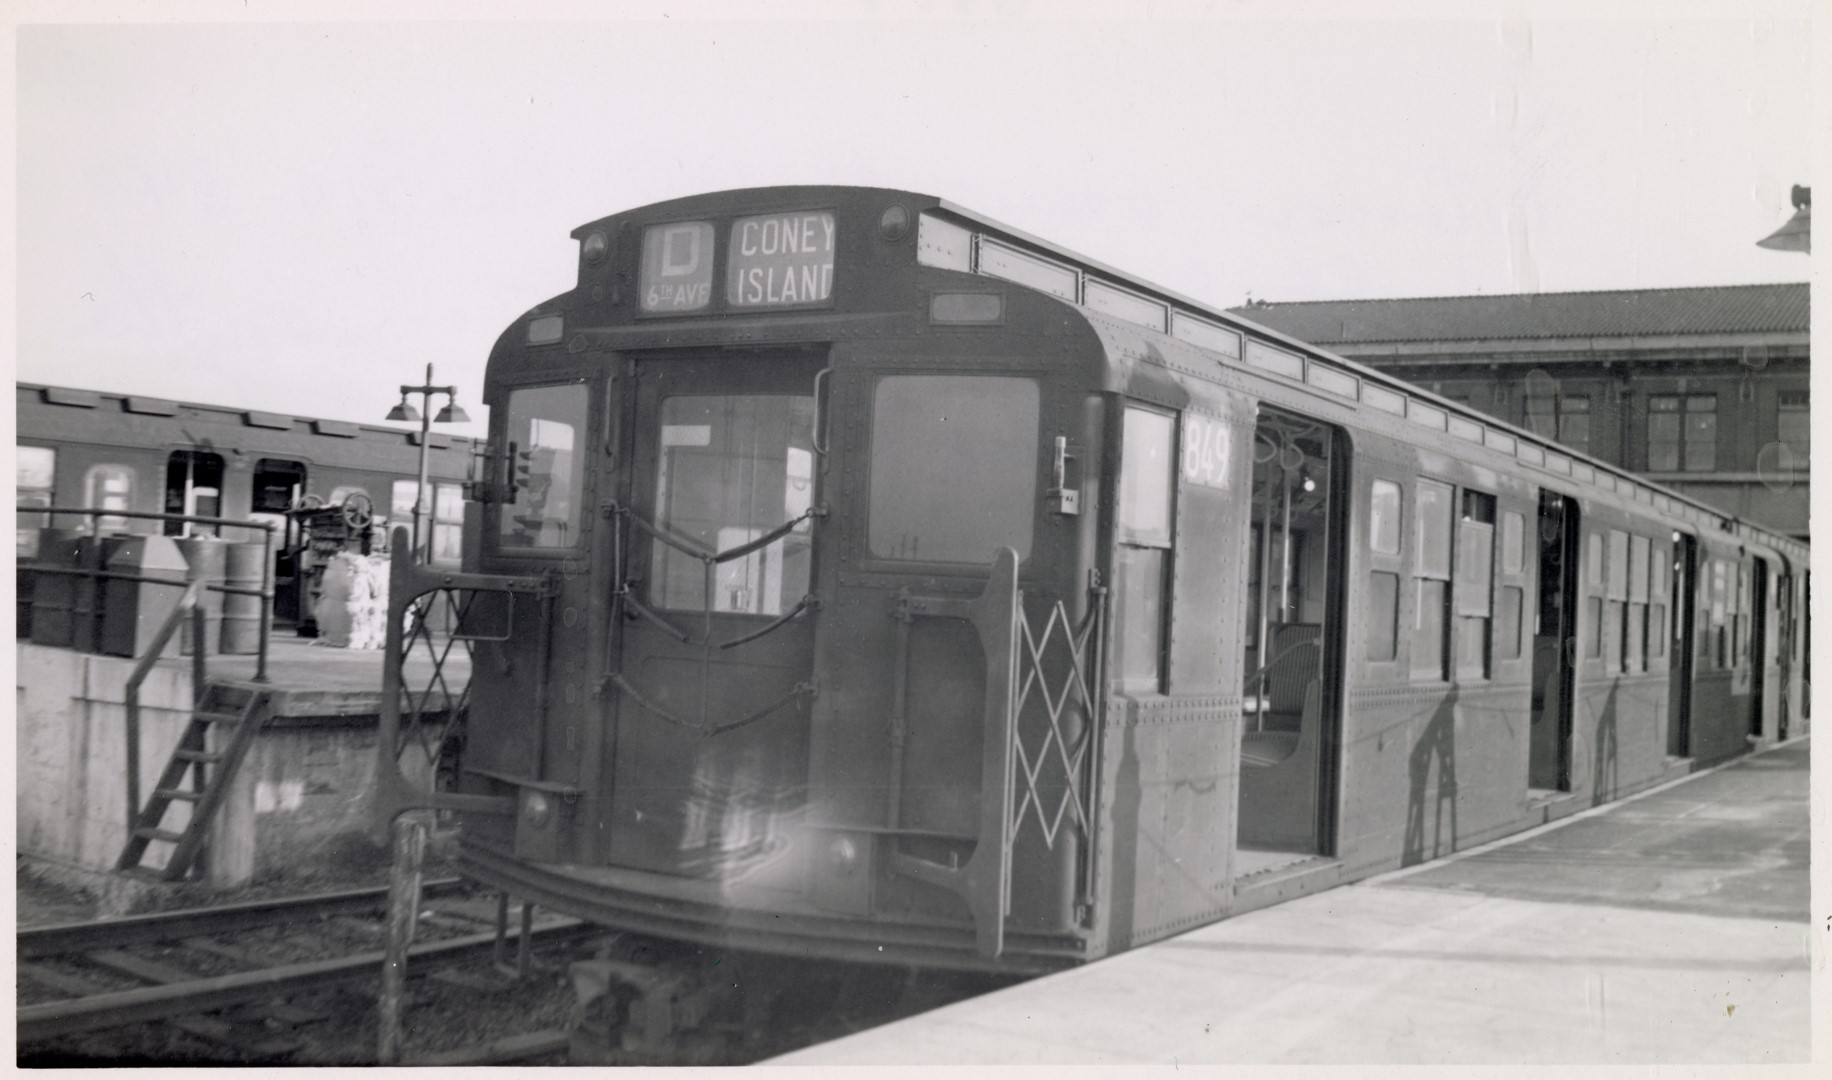 R-4 cars on the first Sunday of D service at Stilwell, 1954